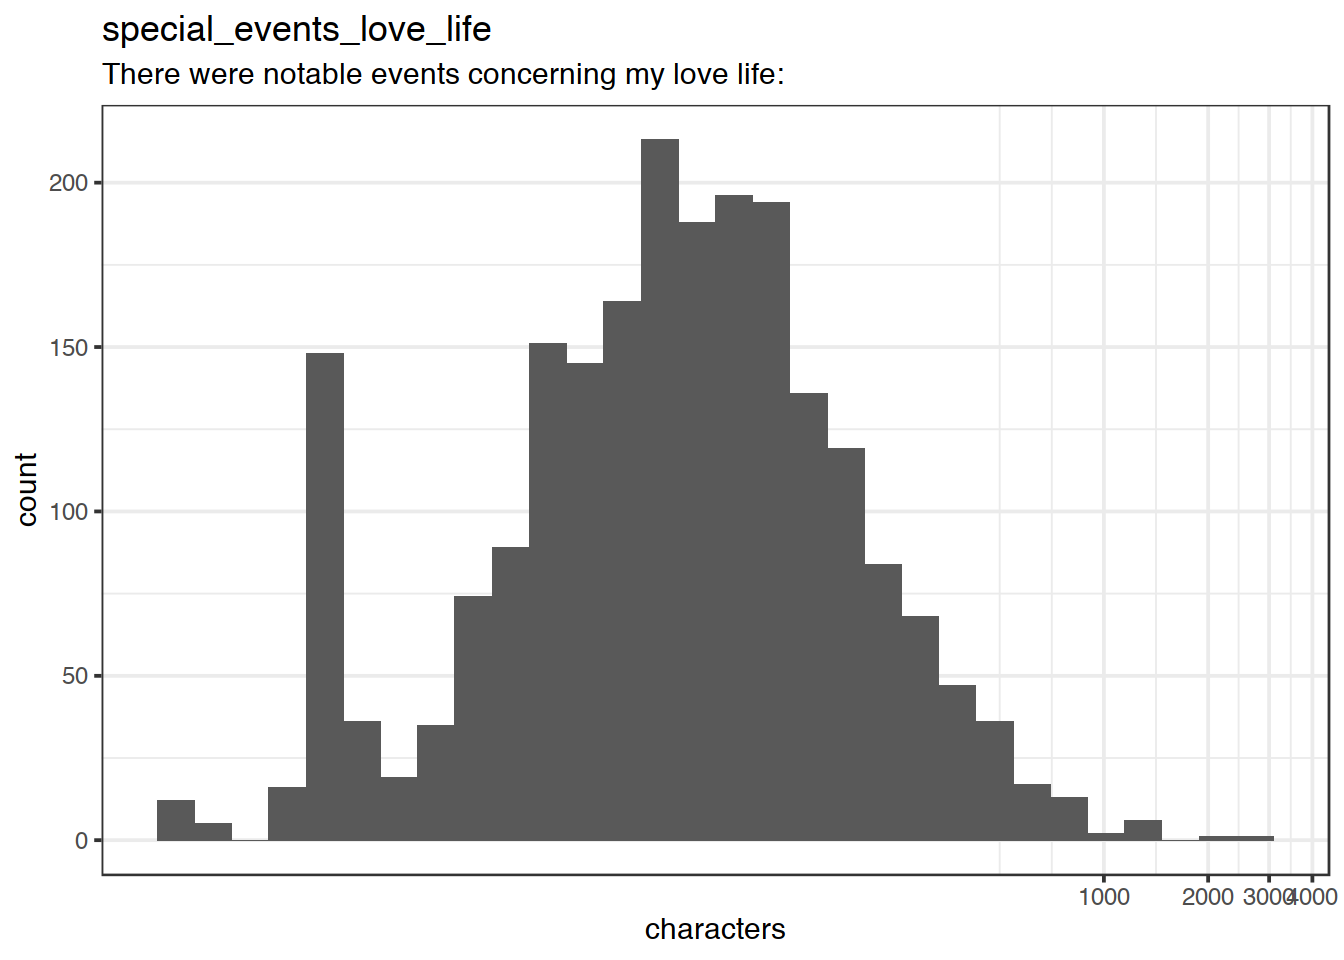 Distribution of values for special_events_love_life